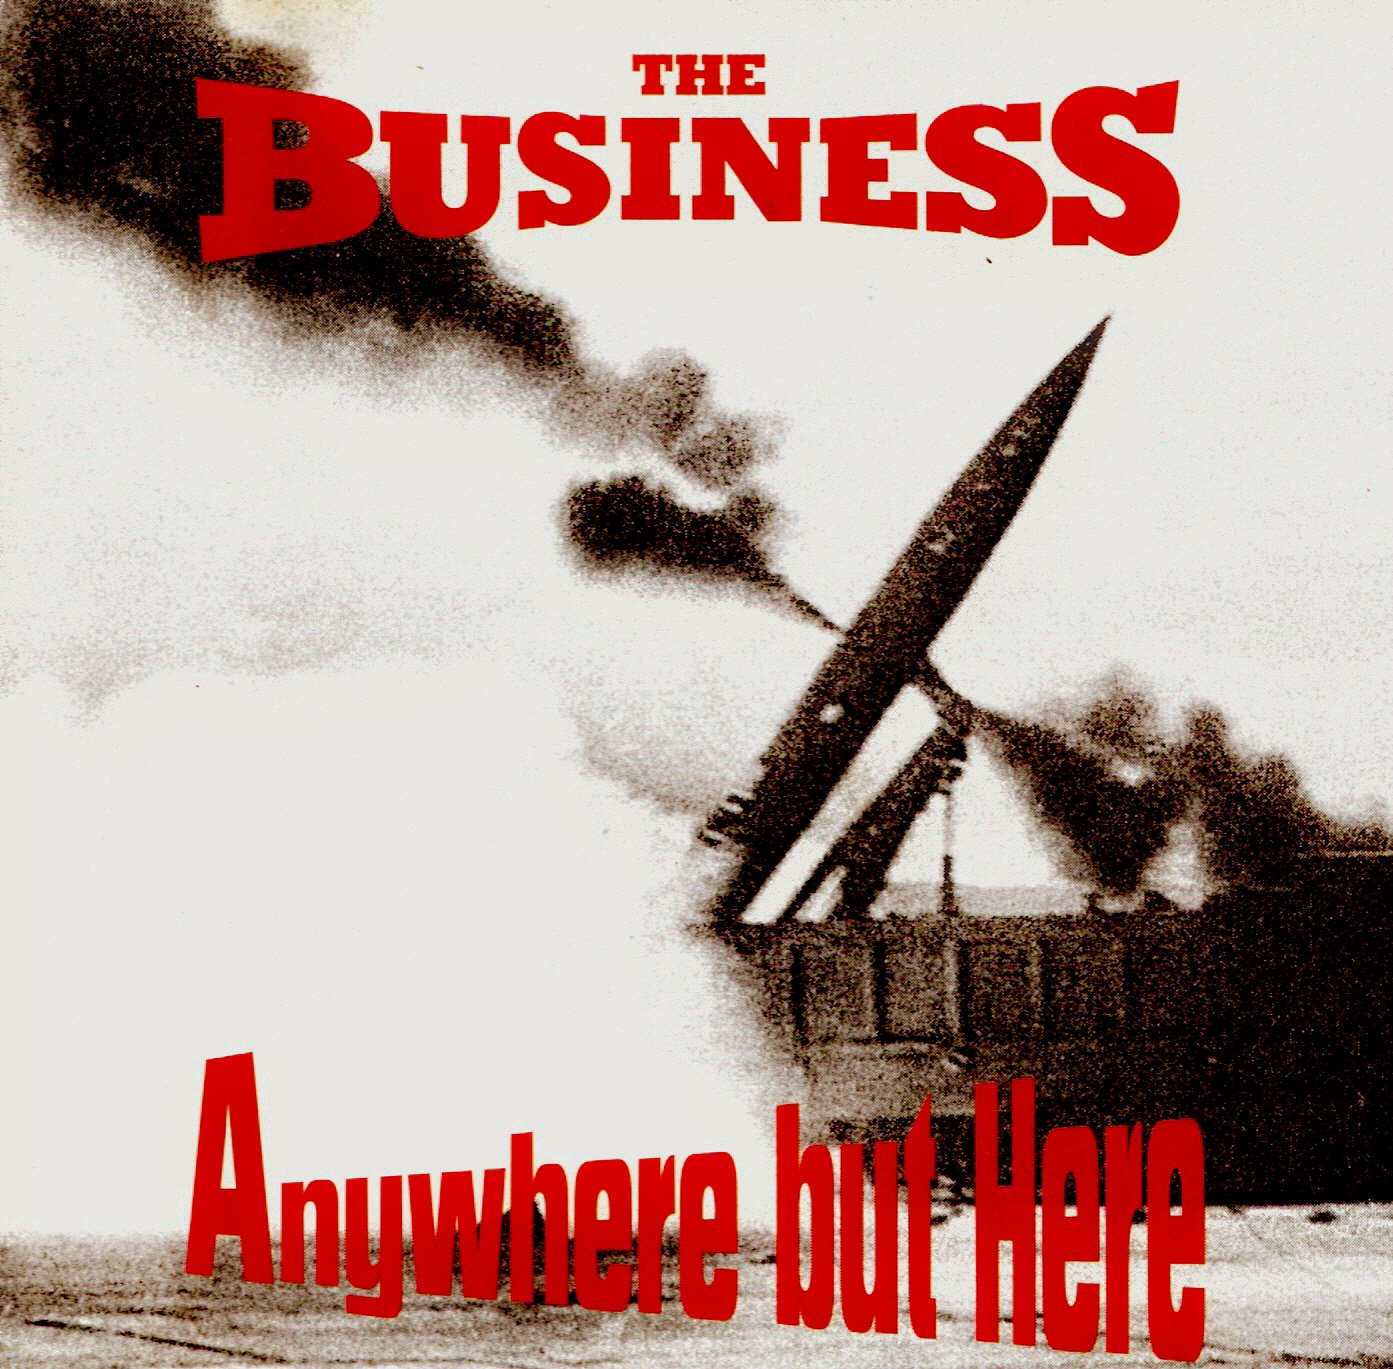 The Business-Anywhere But Here-CDEP-FLAC-1994-FiXIE